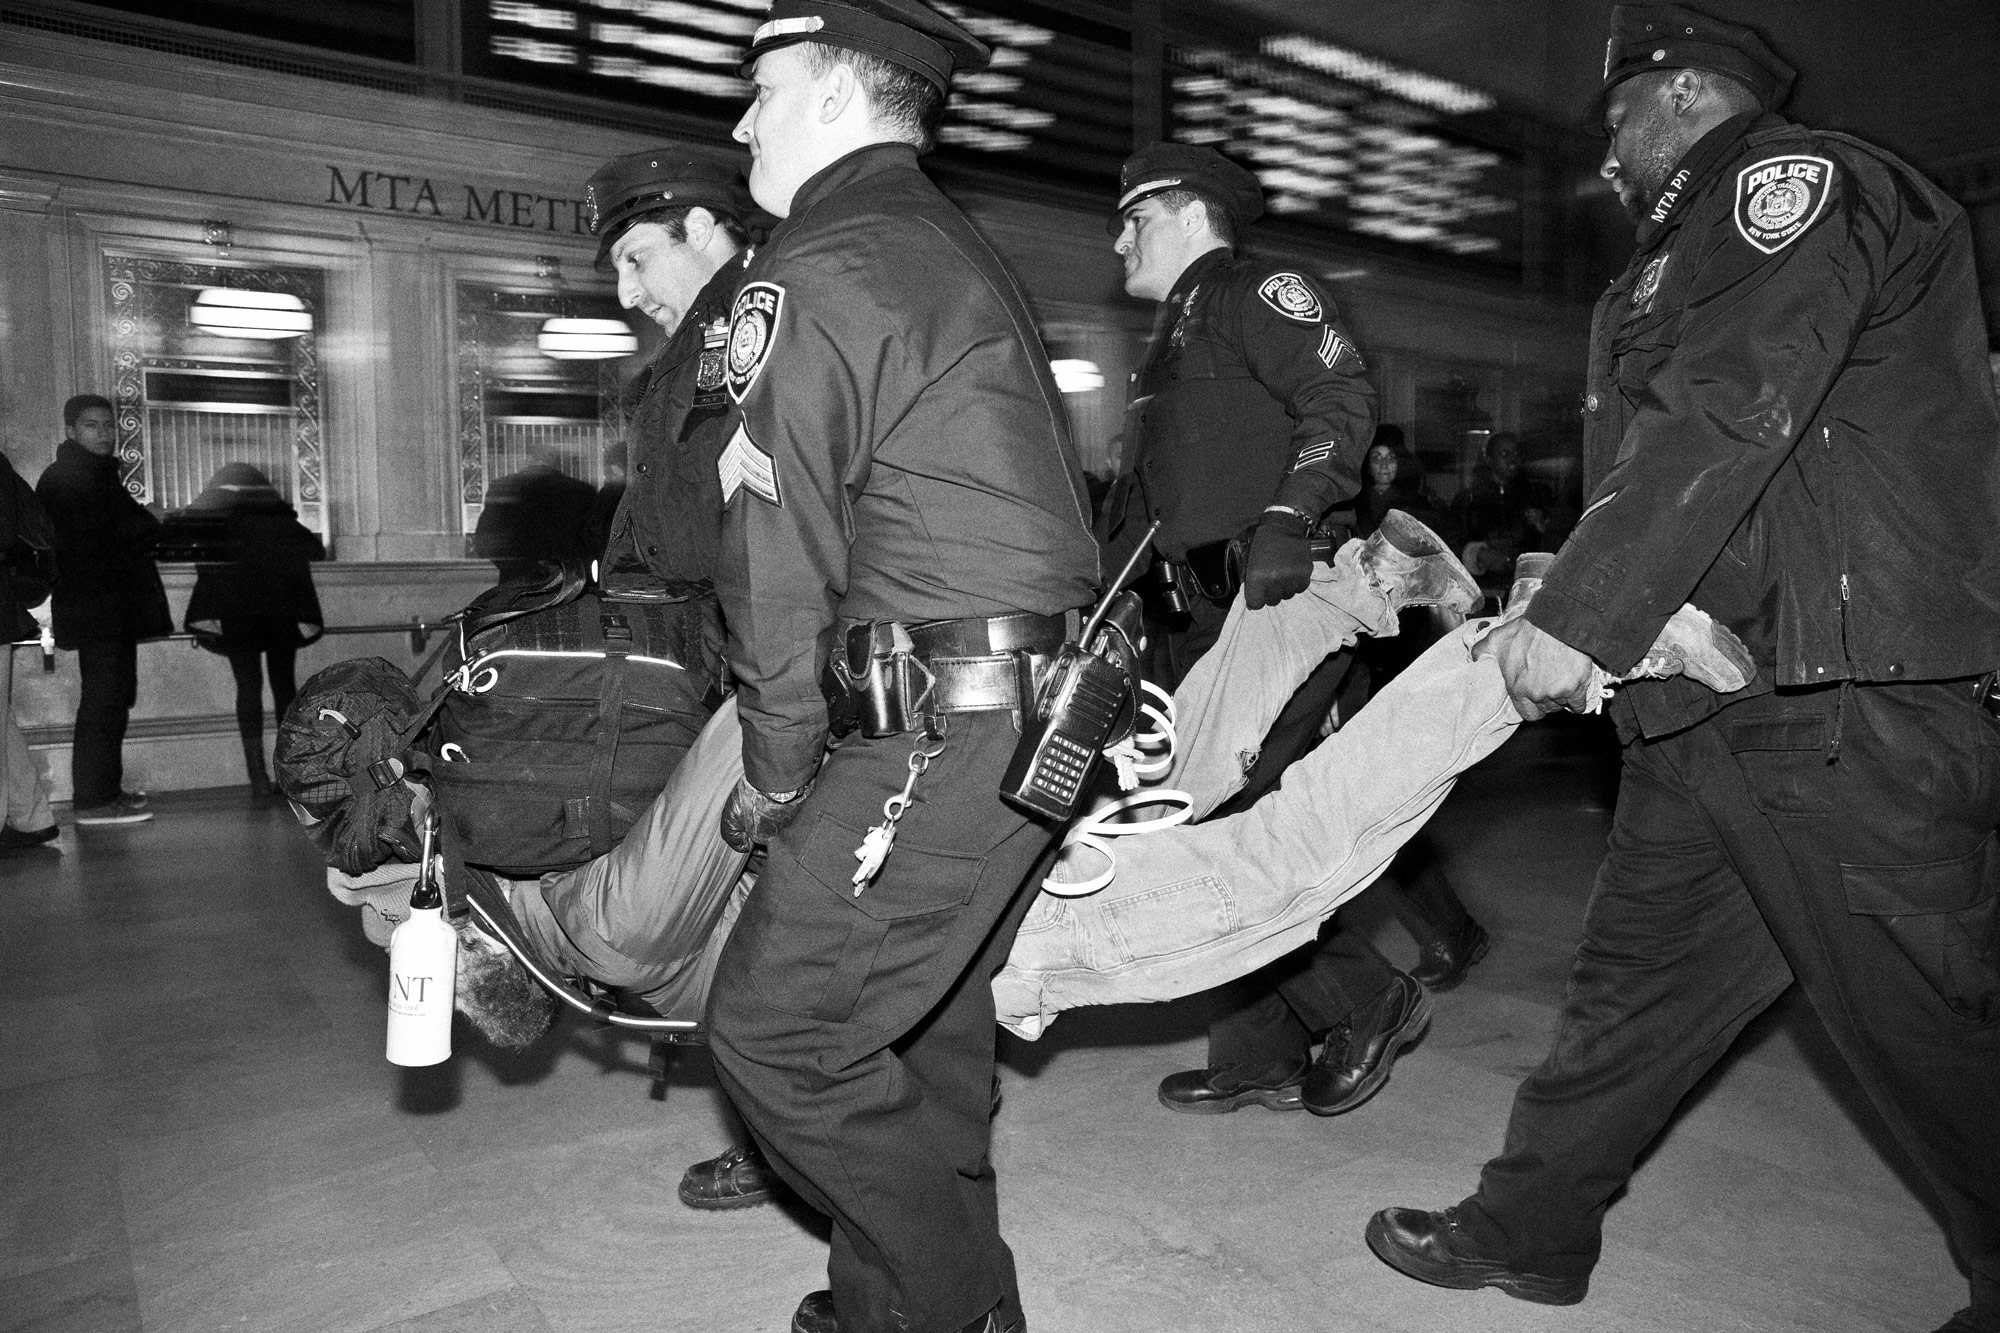 A protester is carried away by police during a peaceful Occupy Wall Street action in Grand Central Station